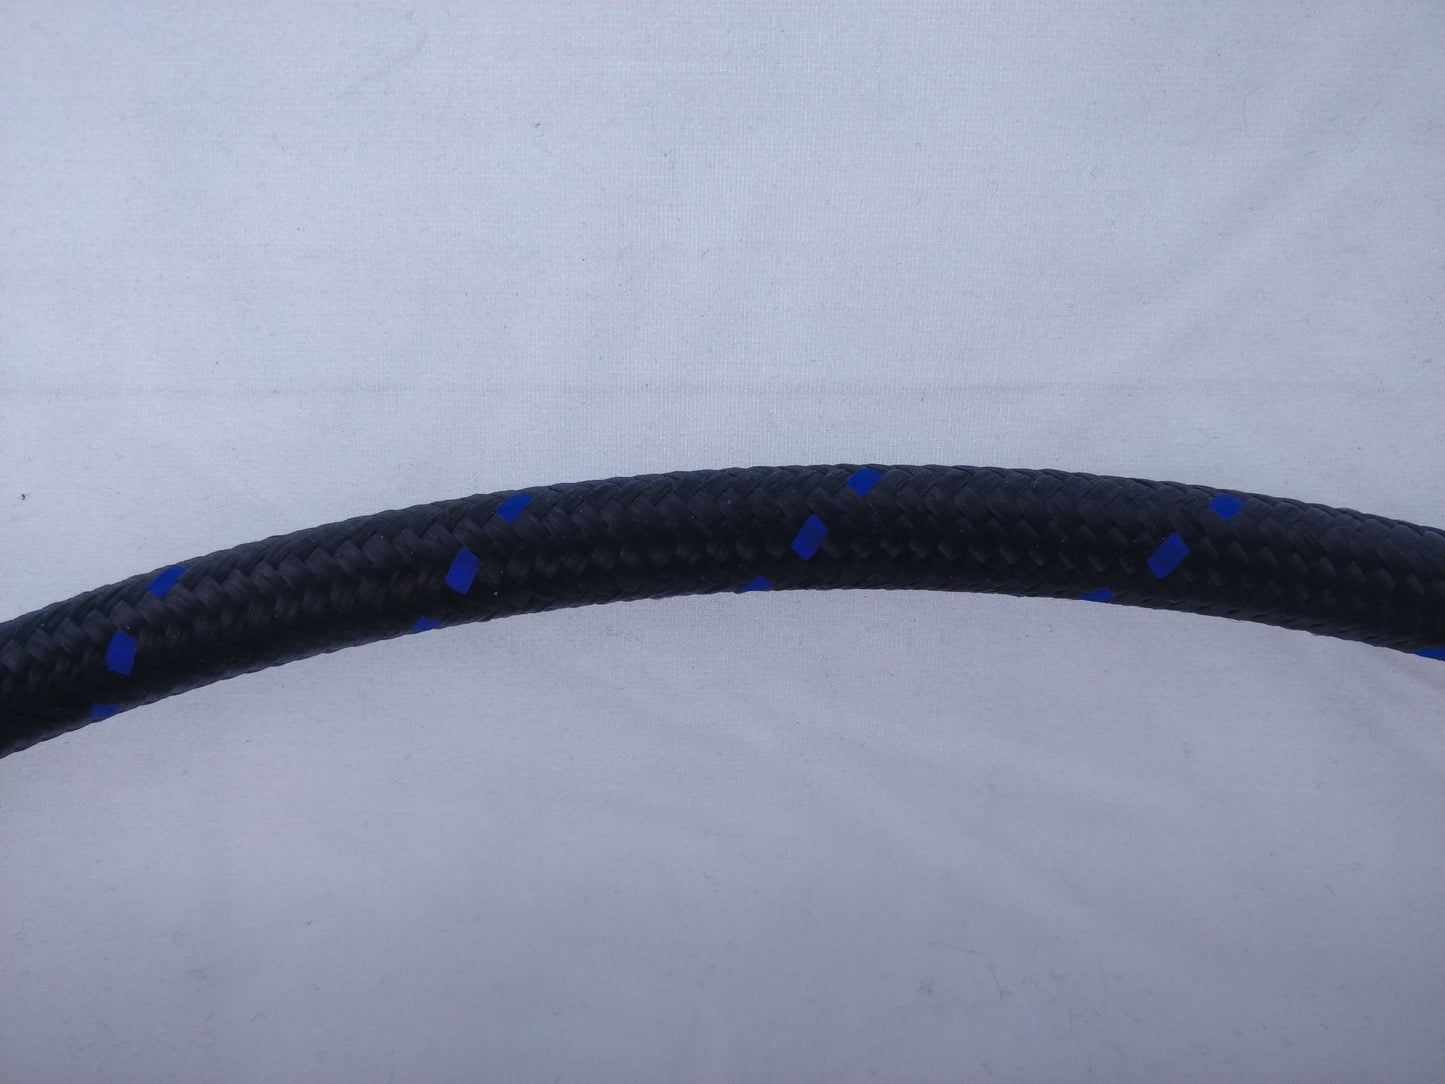 PTFE lined Black Nylon with Blue Check braided hose - AN6, AN8, AN10 - Hot Rod fuel hose by One Guy Garage